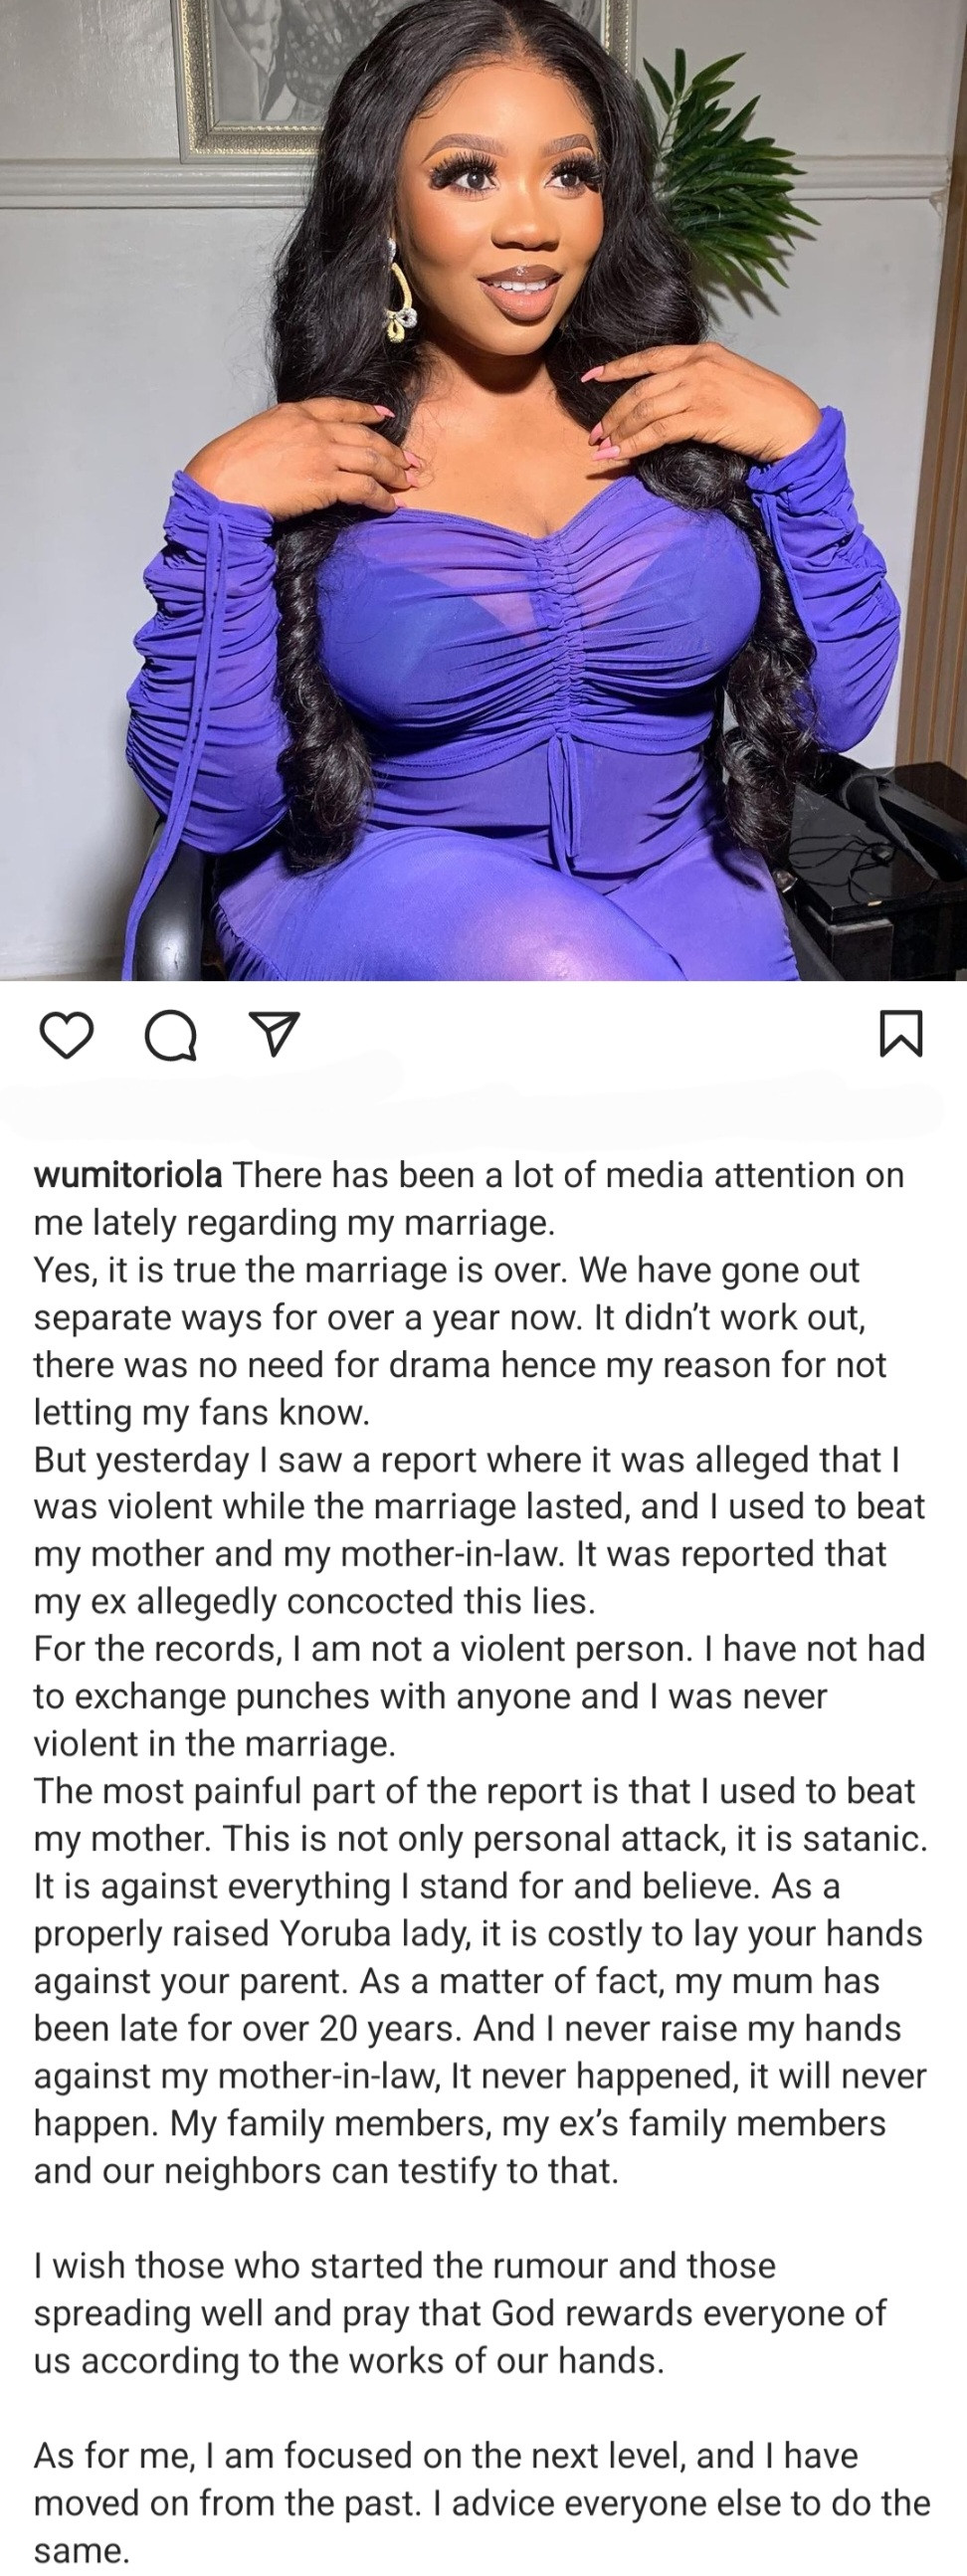 actress wumi toriola confirms her marriage is over 1